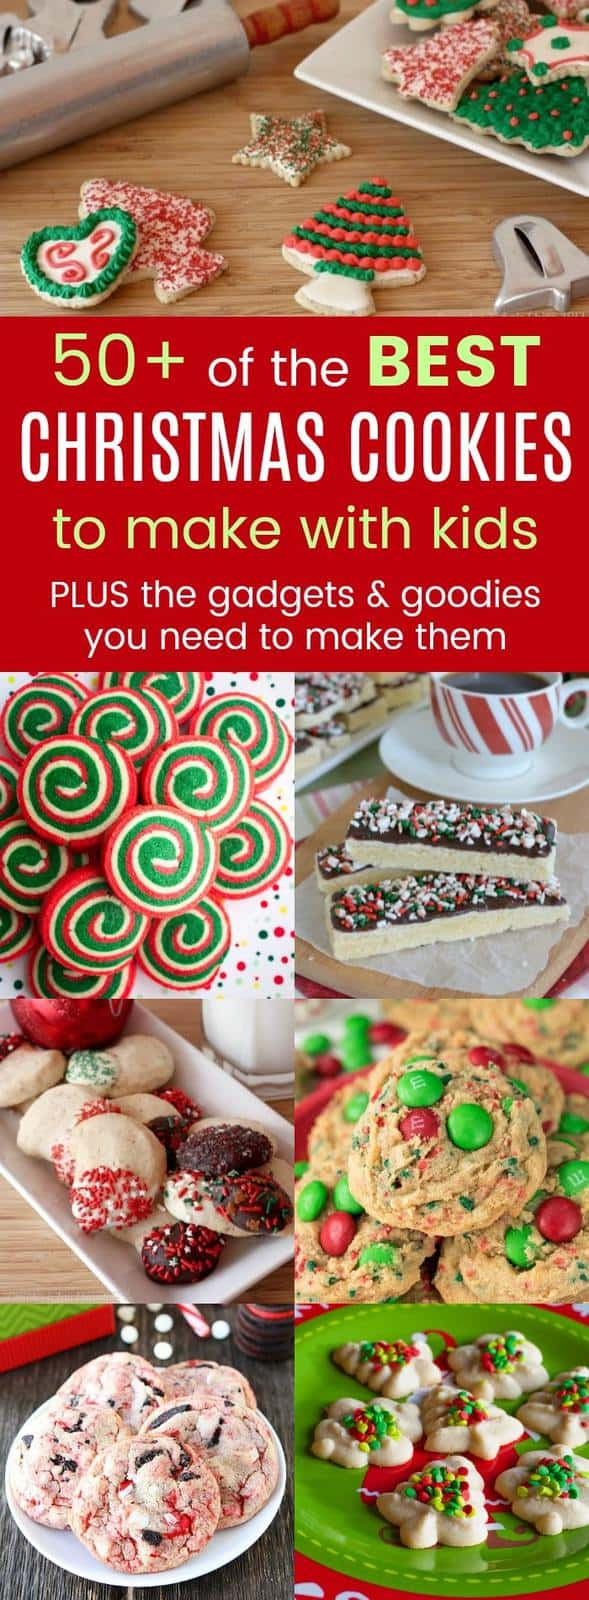 Christmas Cookies To Make With Kids
 The Best Christmas Cookies for Kids Cupcakes & Kale Chips